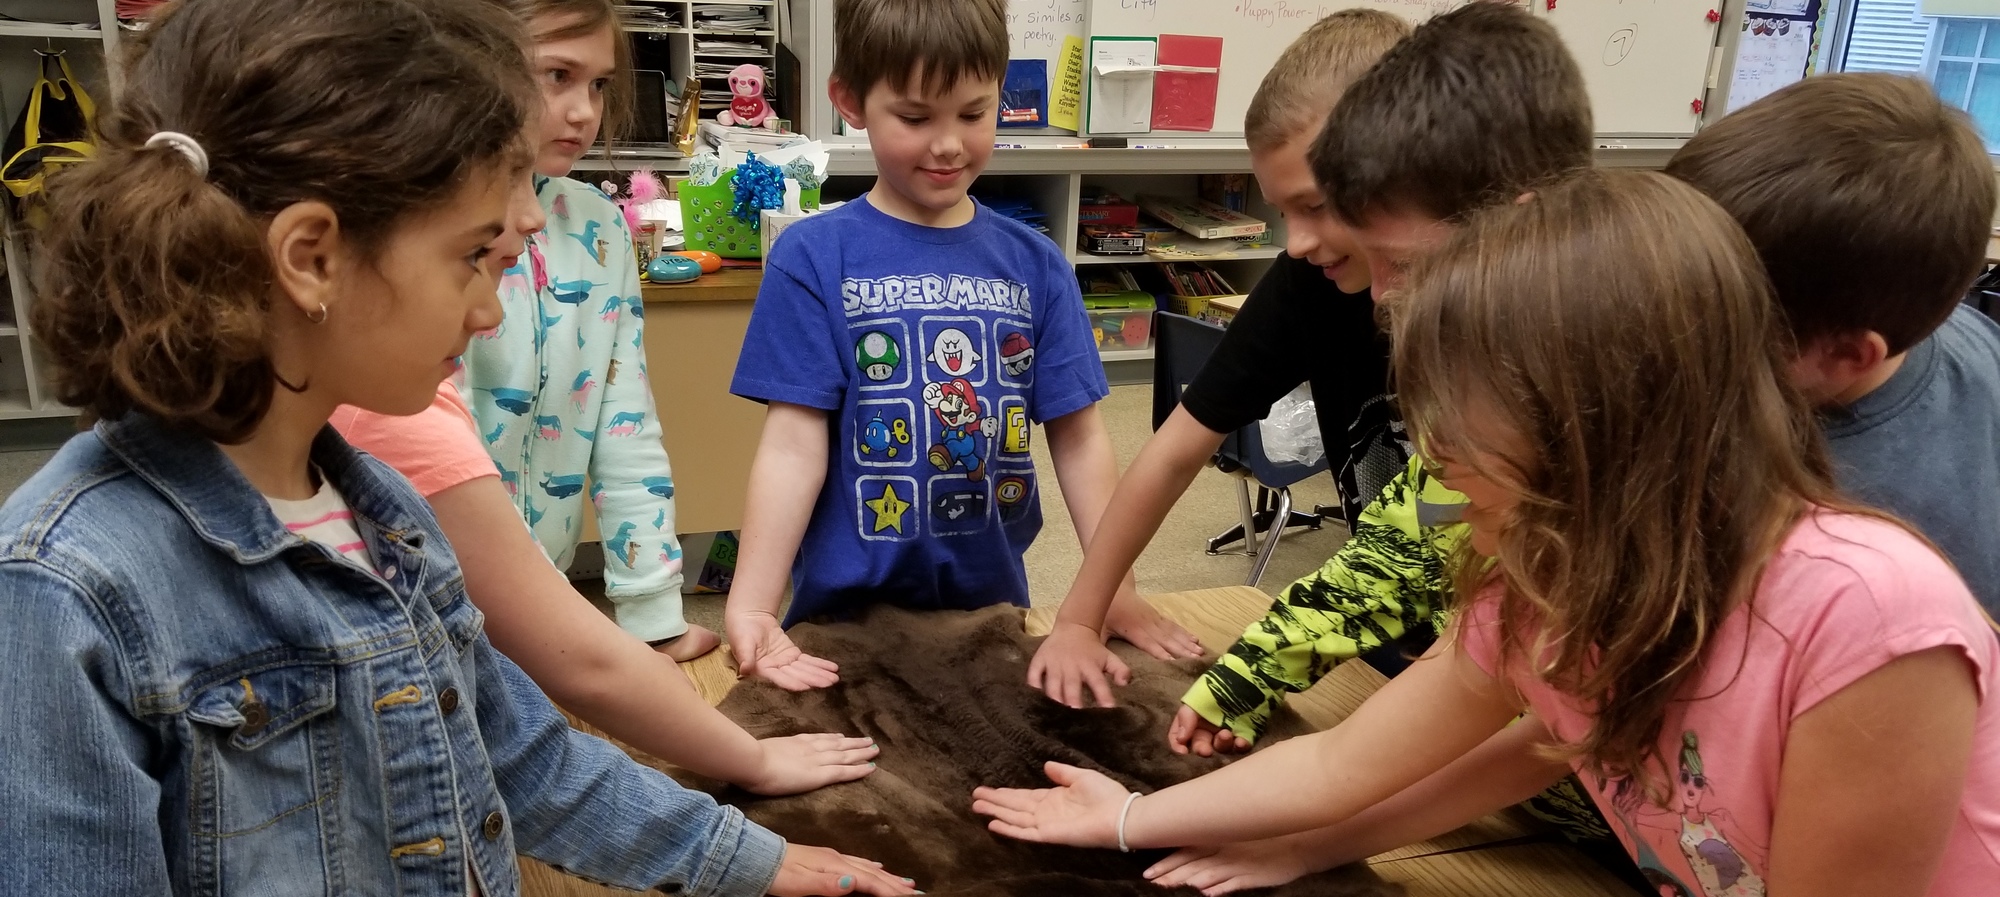 3rd grade students studying Michigan's fur trade were able to see actual fur pelts